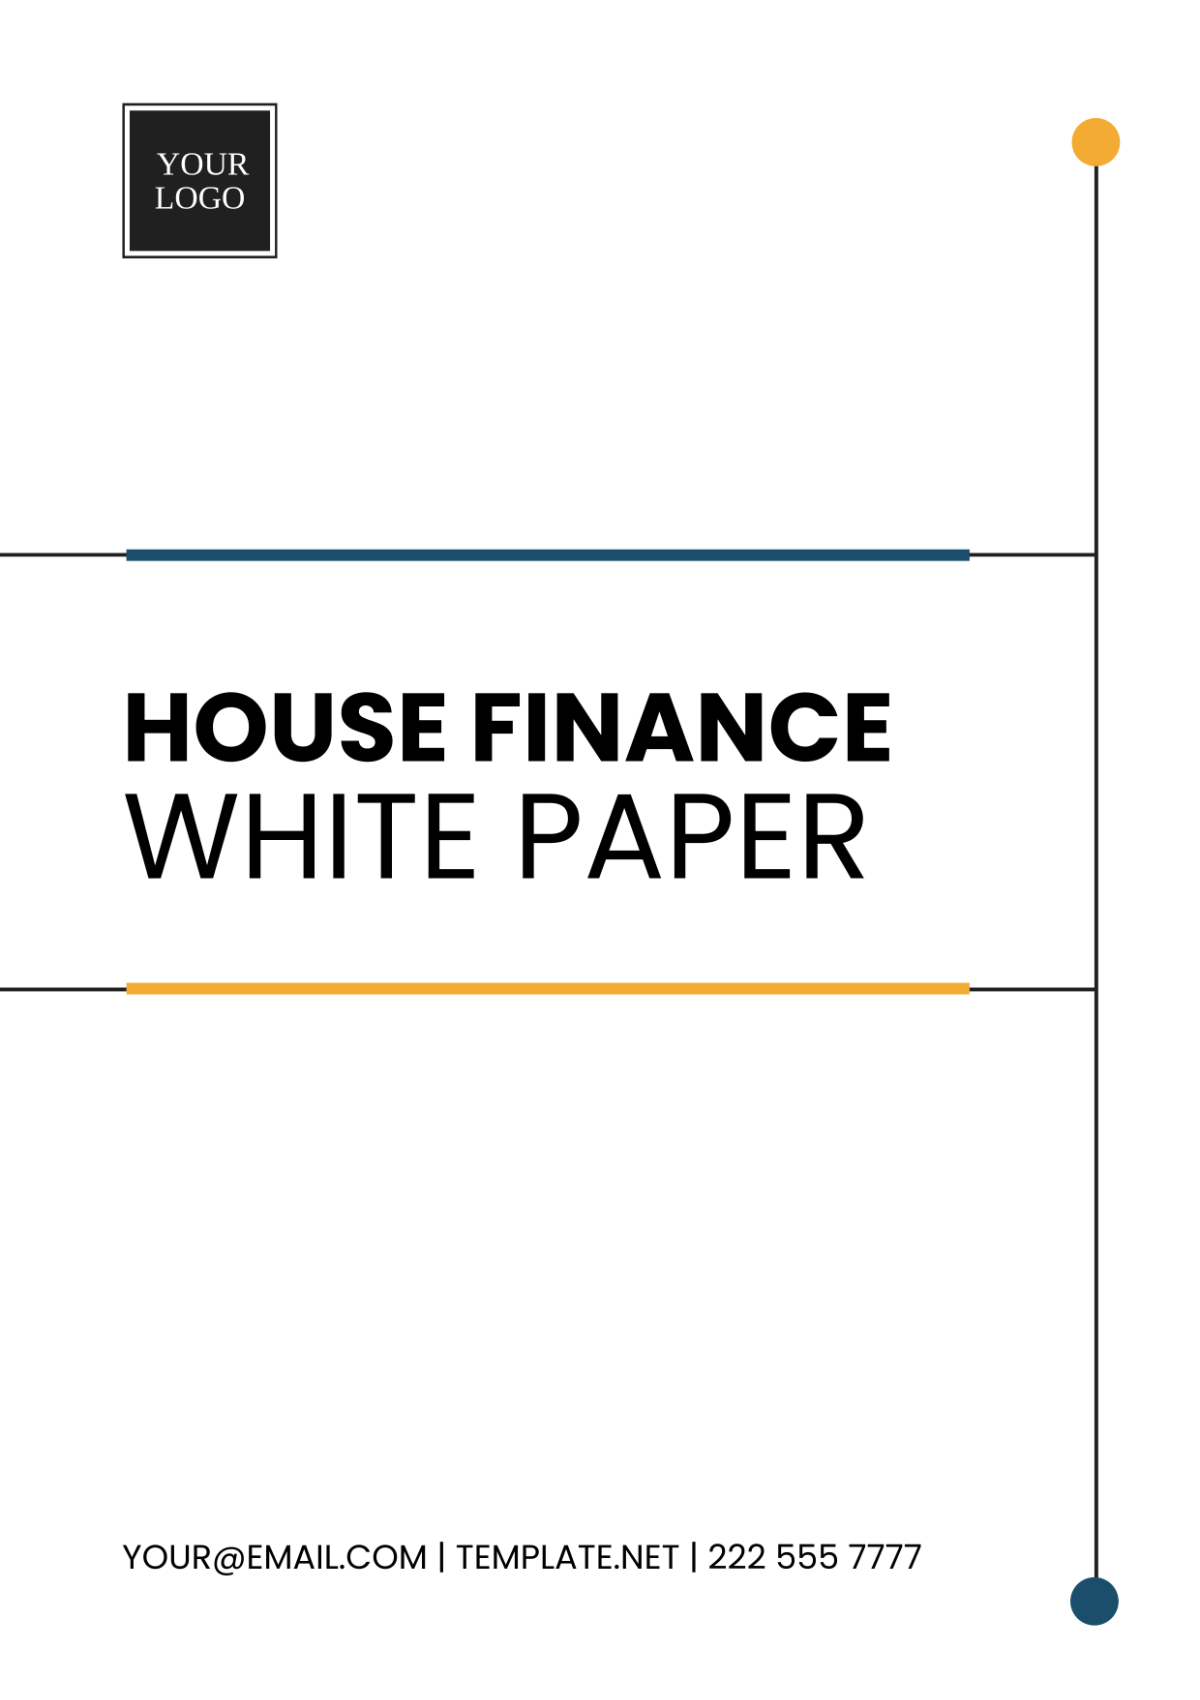 Housing Finance White Paper Template